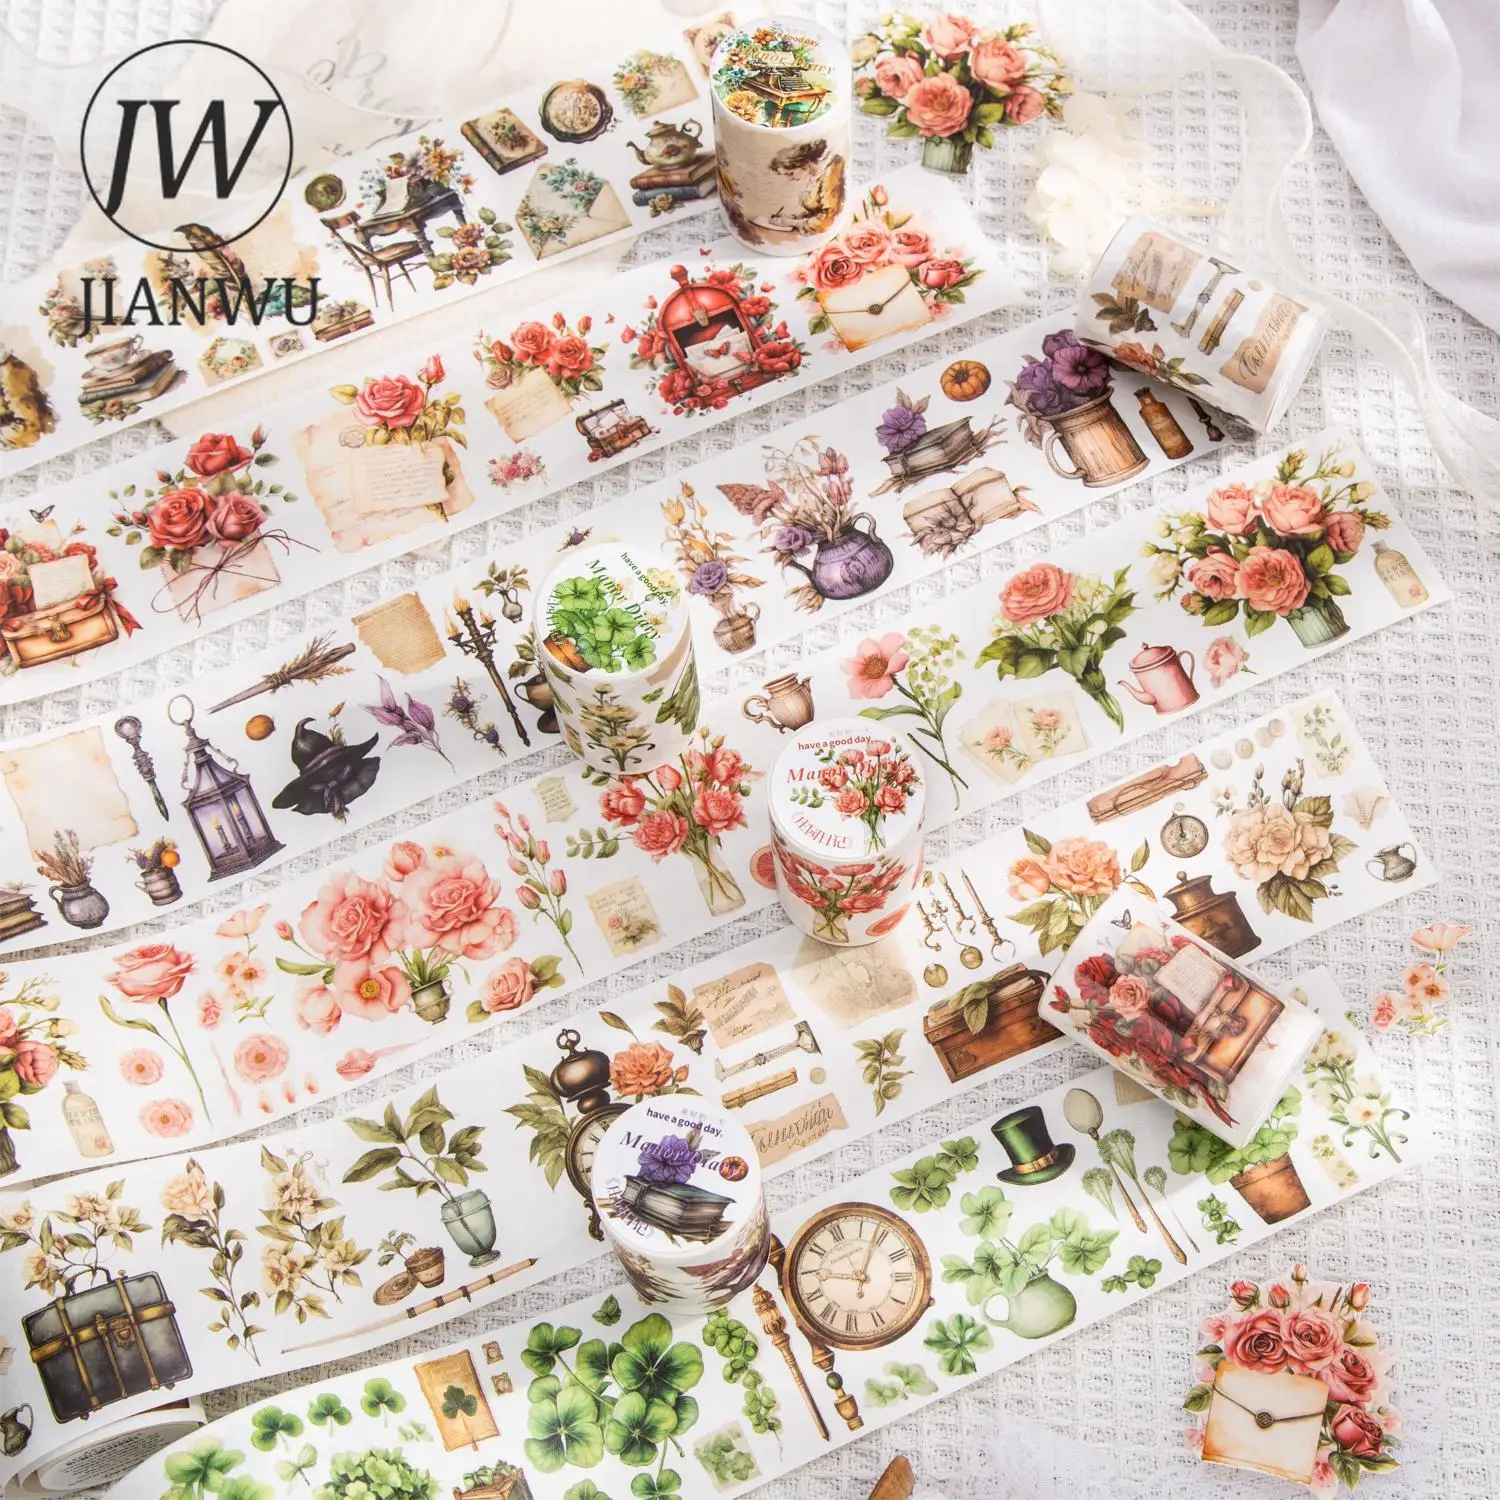 

JIANWU 60mm*200cm Manor Diary Series Vintage Plant Material Washi Tape Creative DIY Journal Collage Scrapbooking Stationery